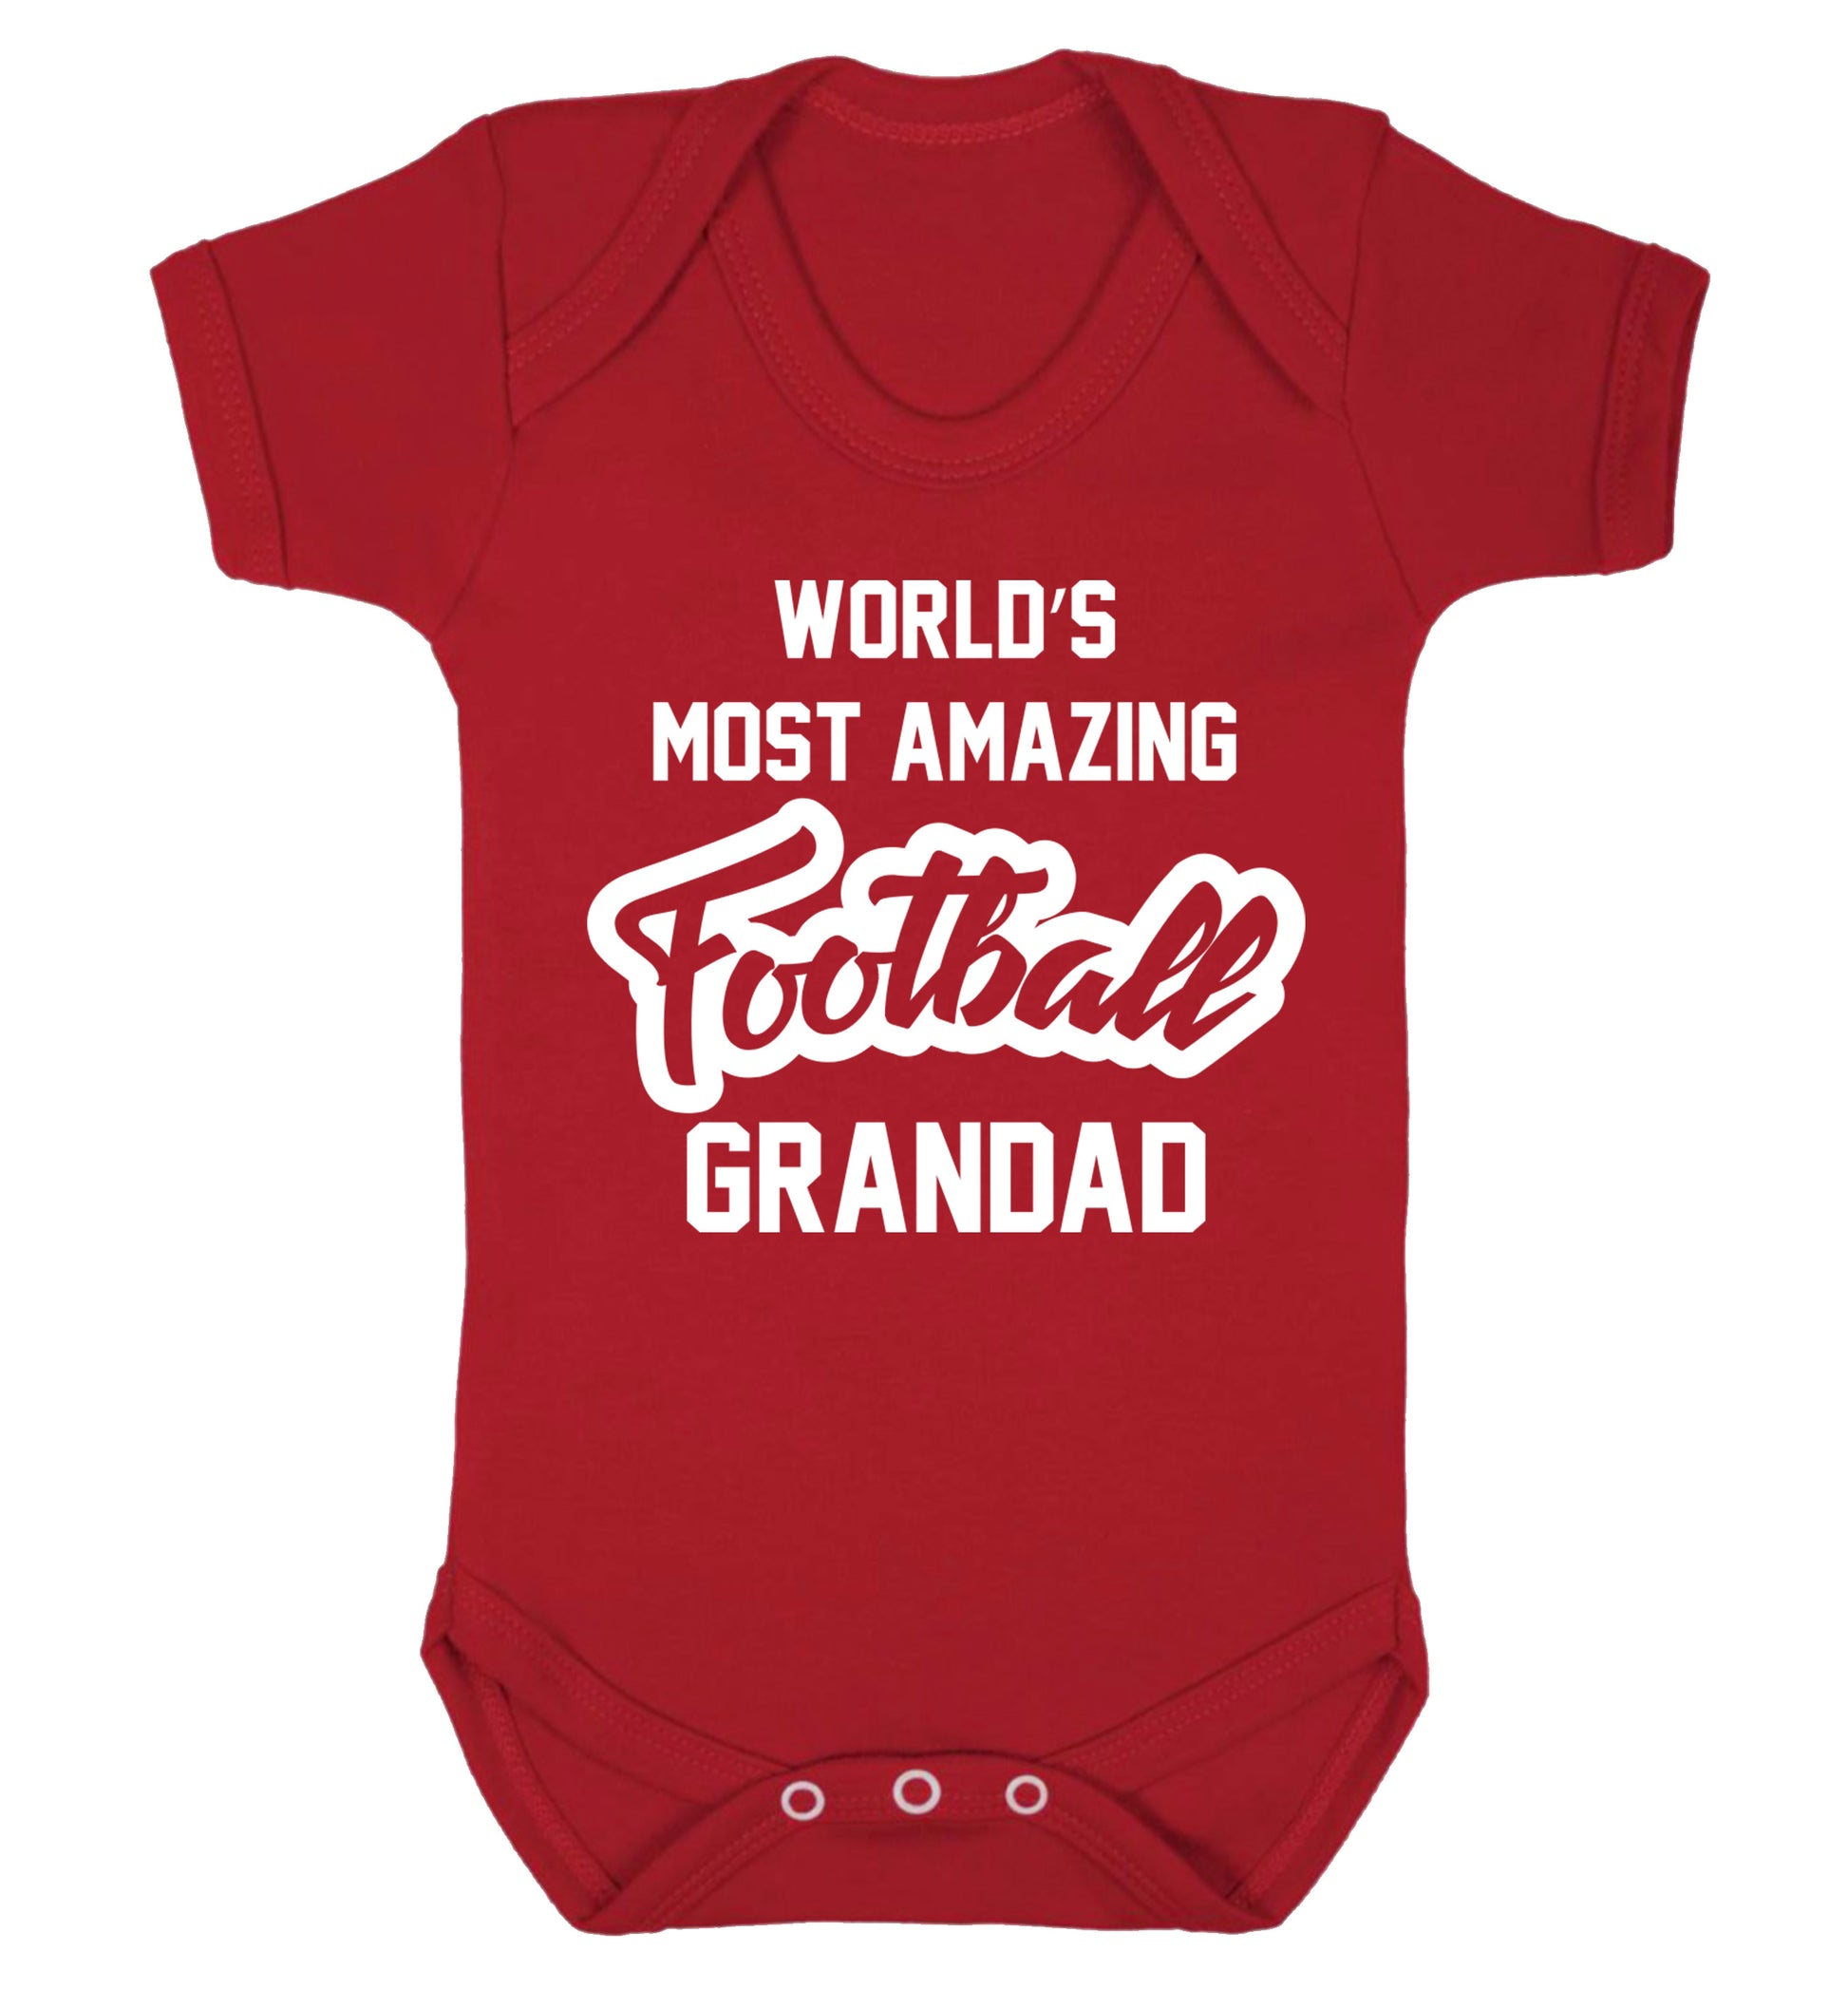 Worlds most amazing football grandad Baby Vest red 18-24 months